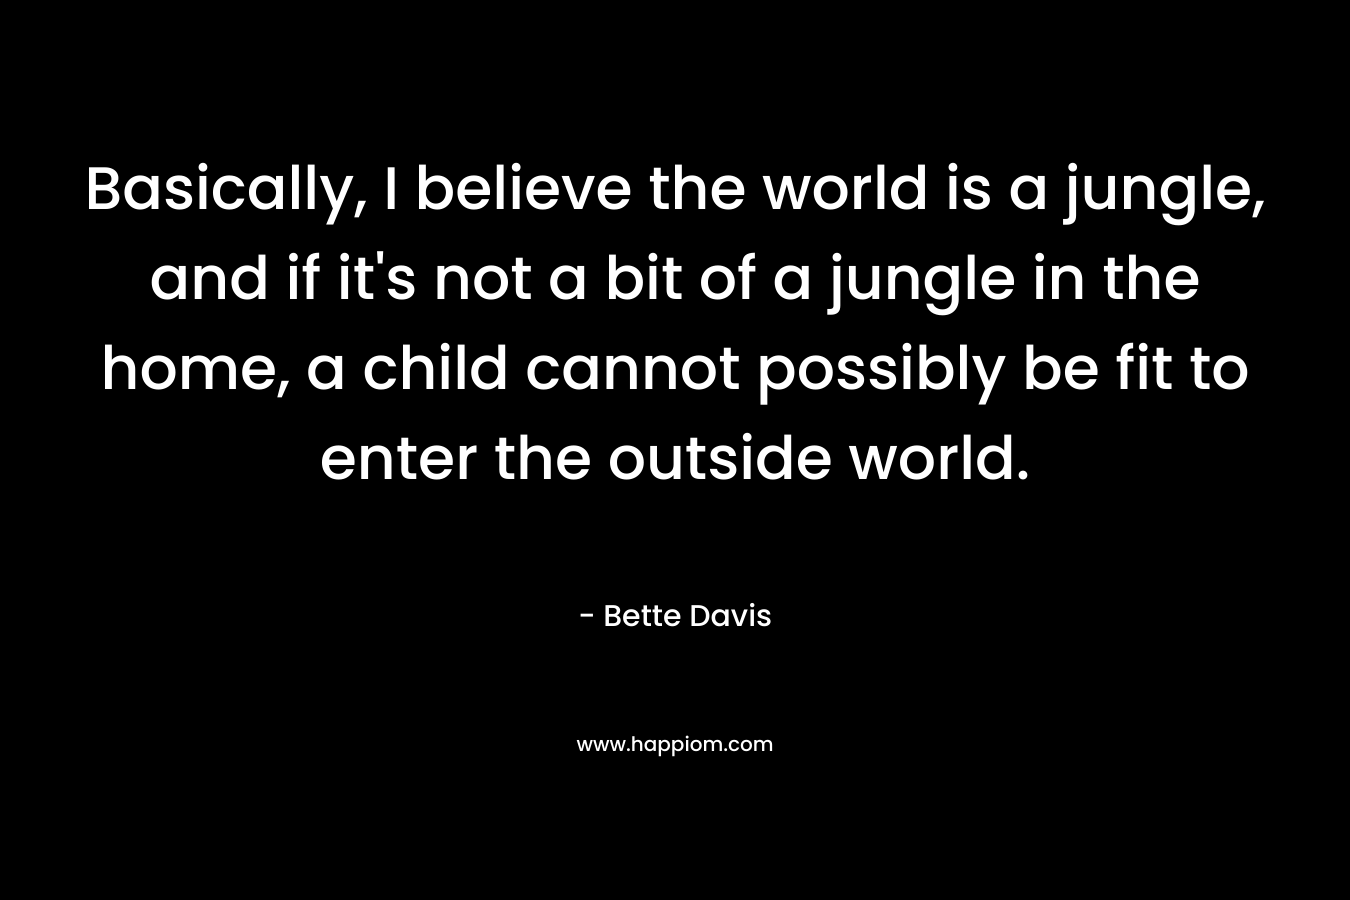 Basically, I believe the world is a jungle, and if it’s not a bit of a jungle in the home, a child cannot possibly be fit to enter the outside world. – Bette Davis